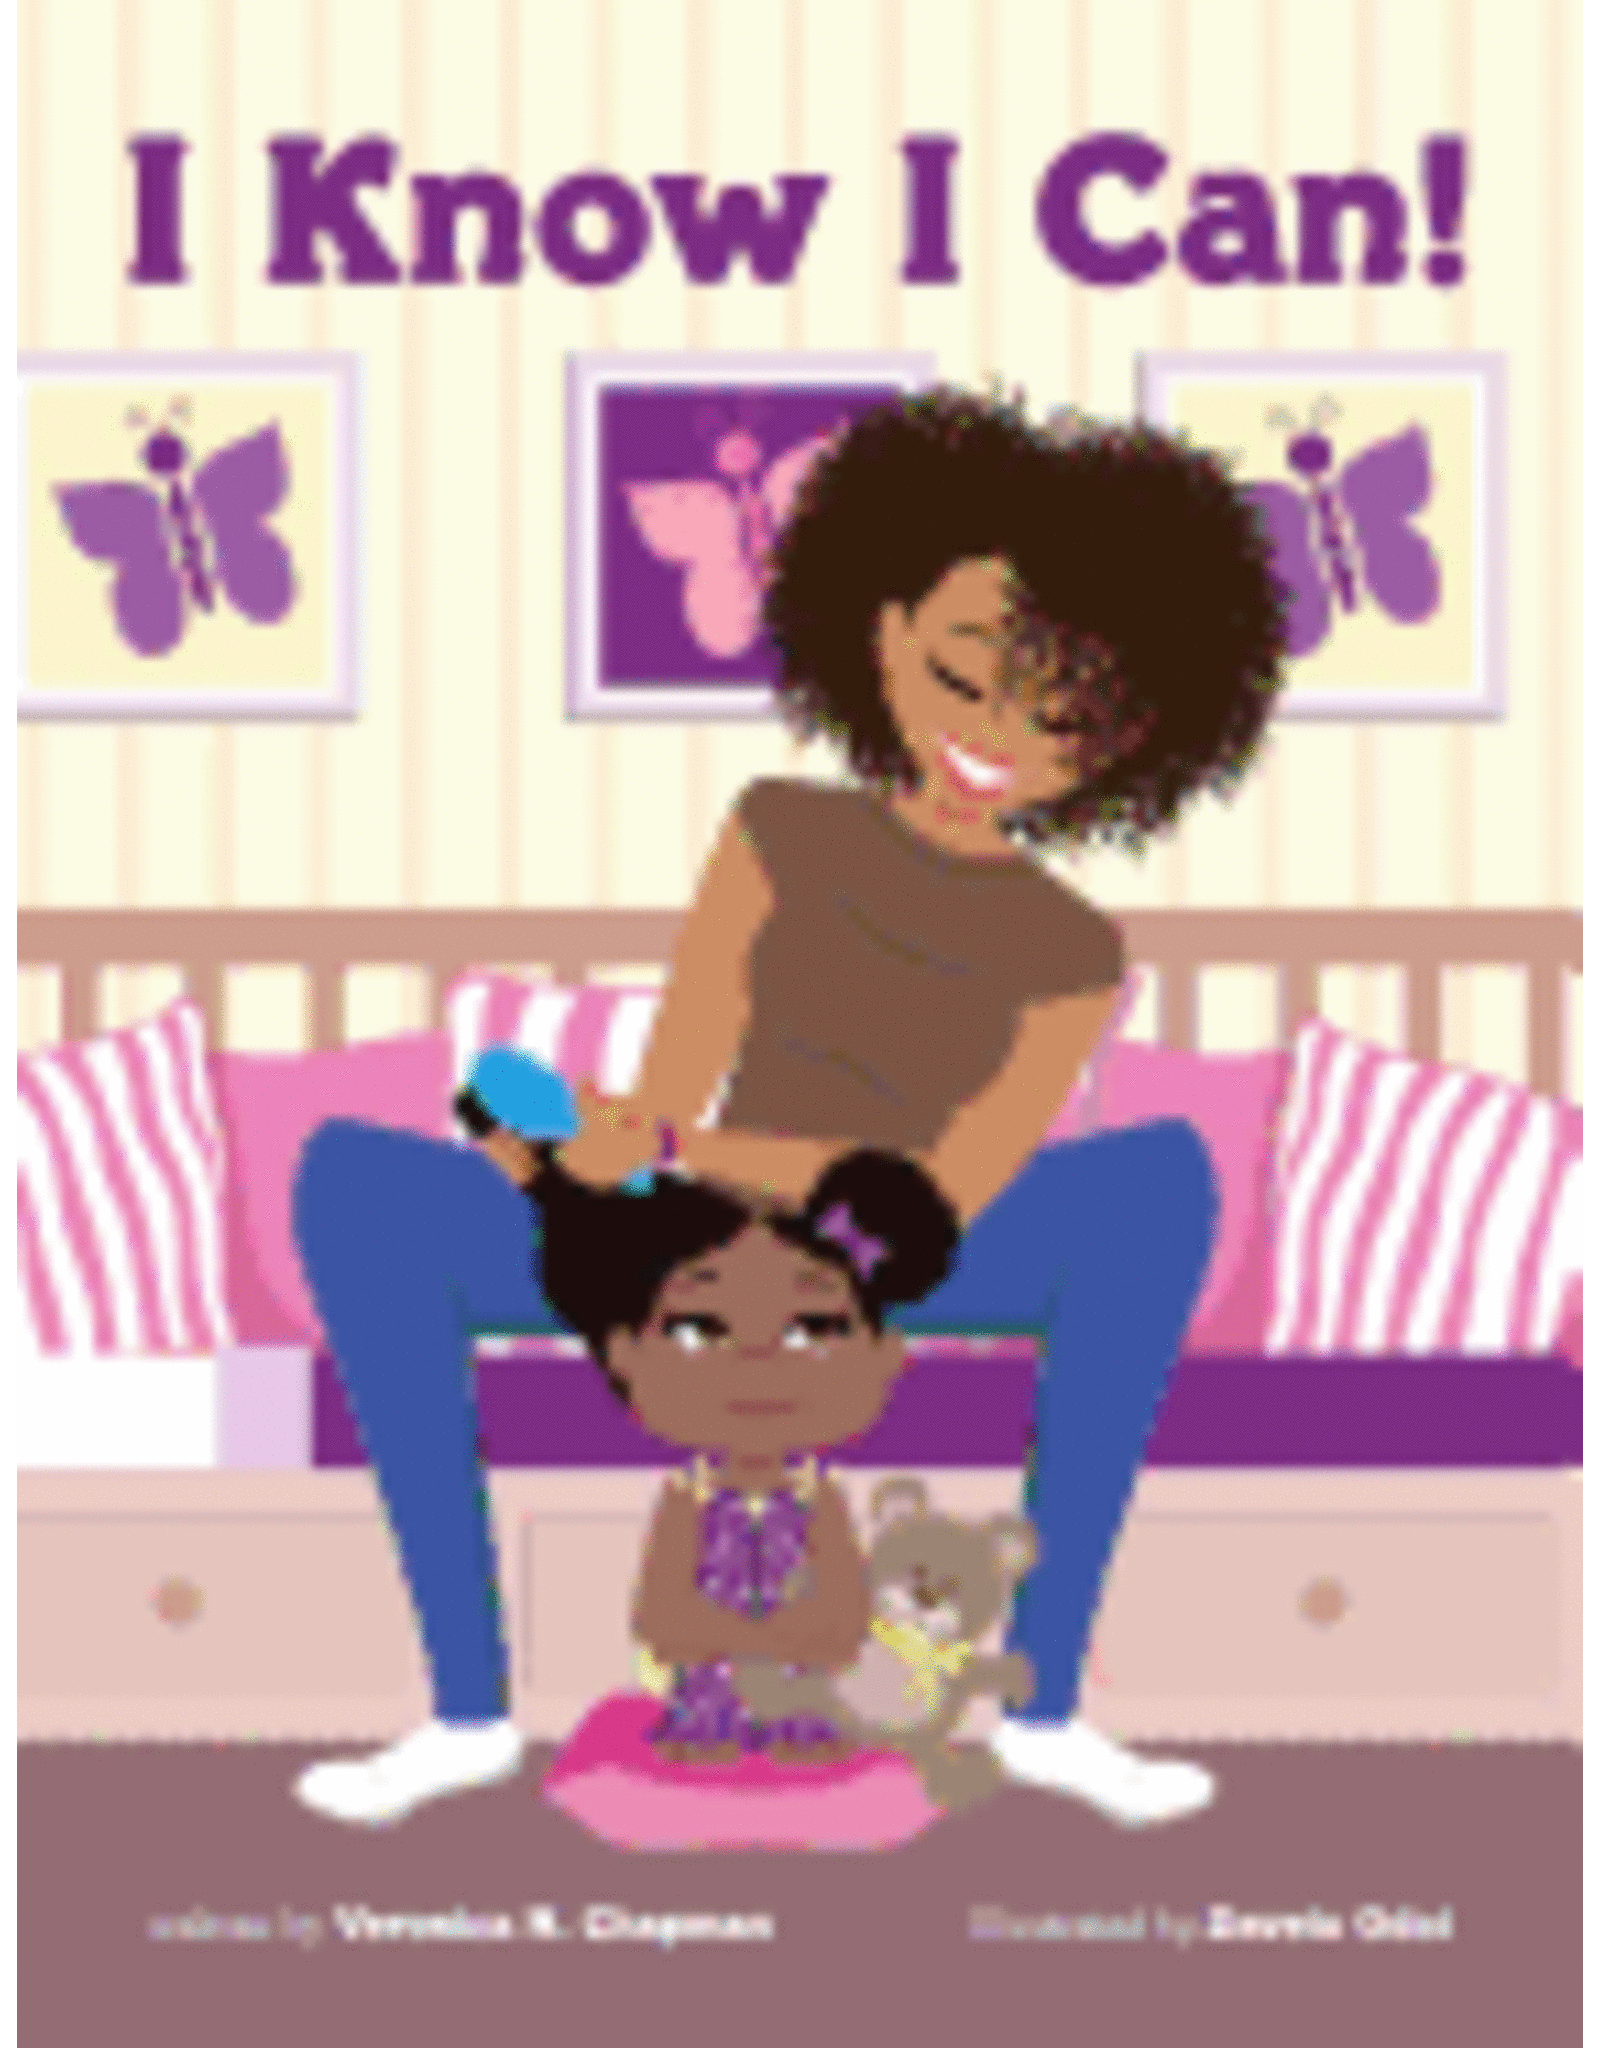 Books I Know I Can! by Veronica Chapman (Griot Book Club)